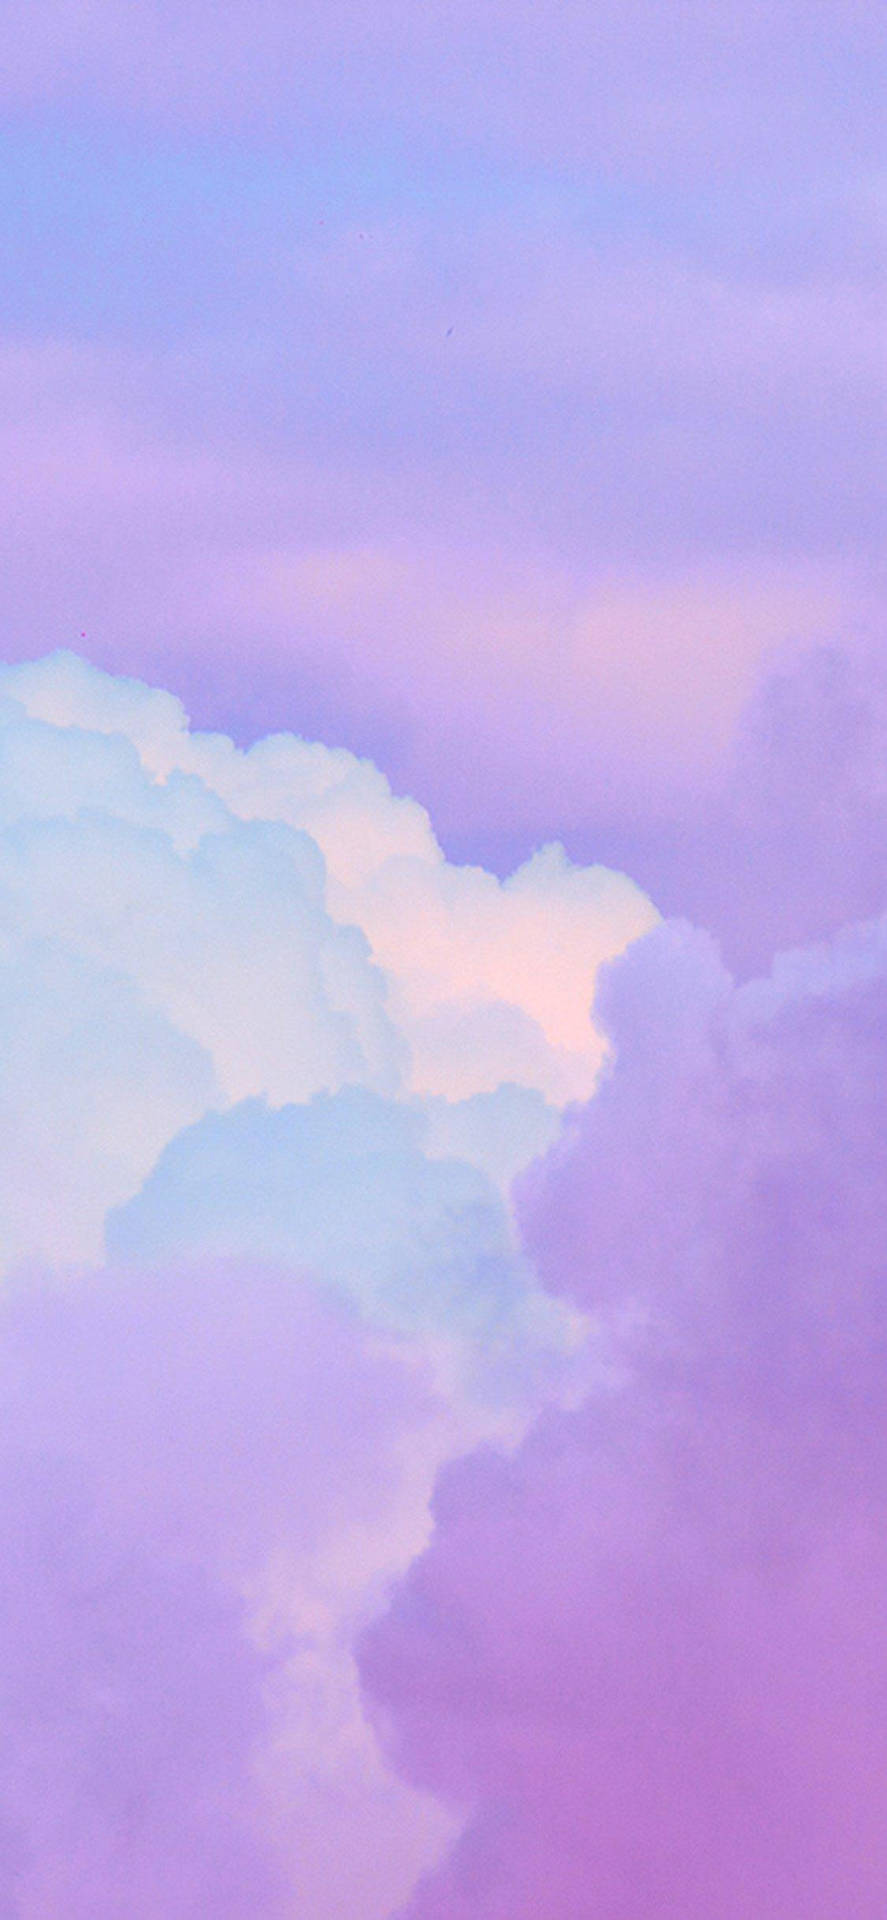 A mesmerising mix of purple hues in the sky Wallpaper